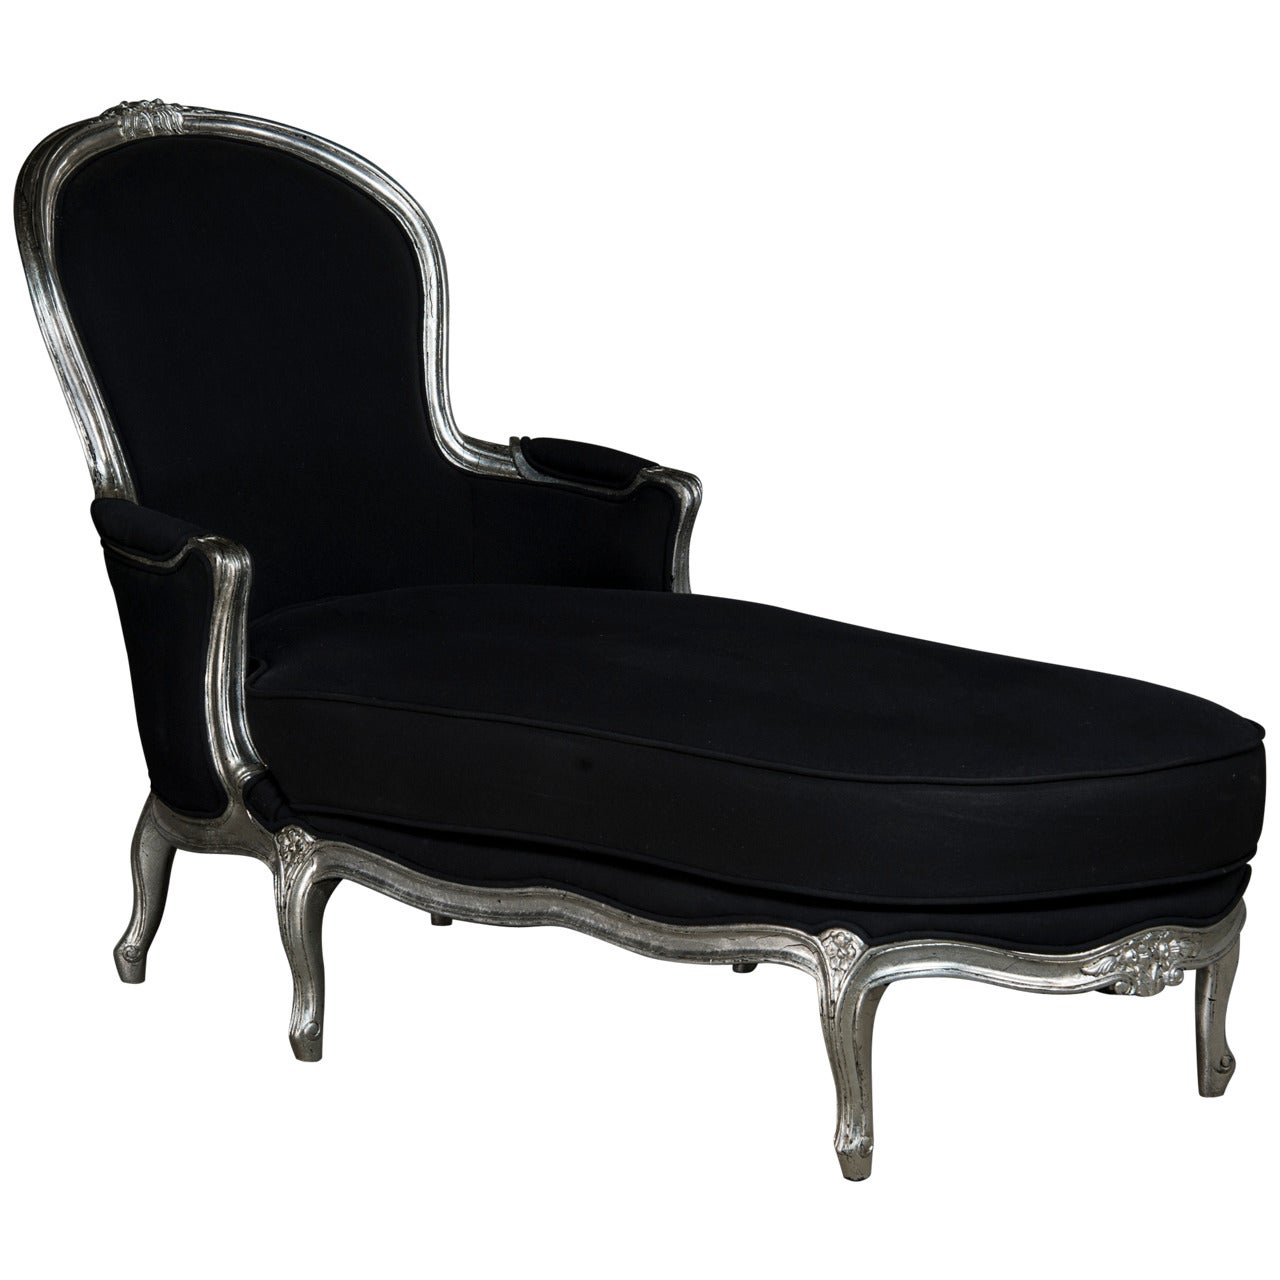 French Chaise Longue with Silver Leaf, Late 19th Century